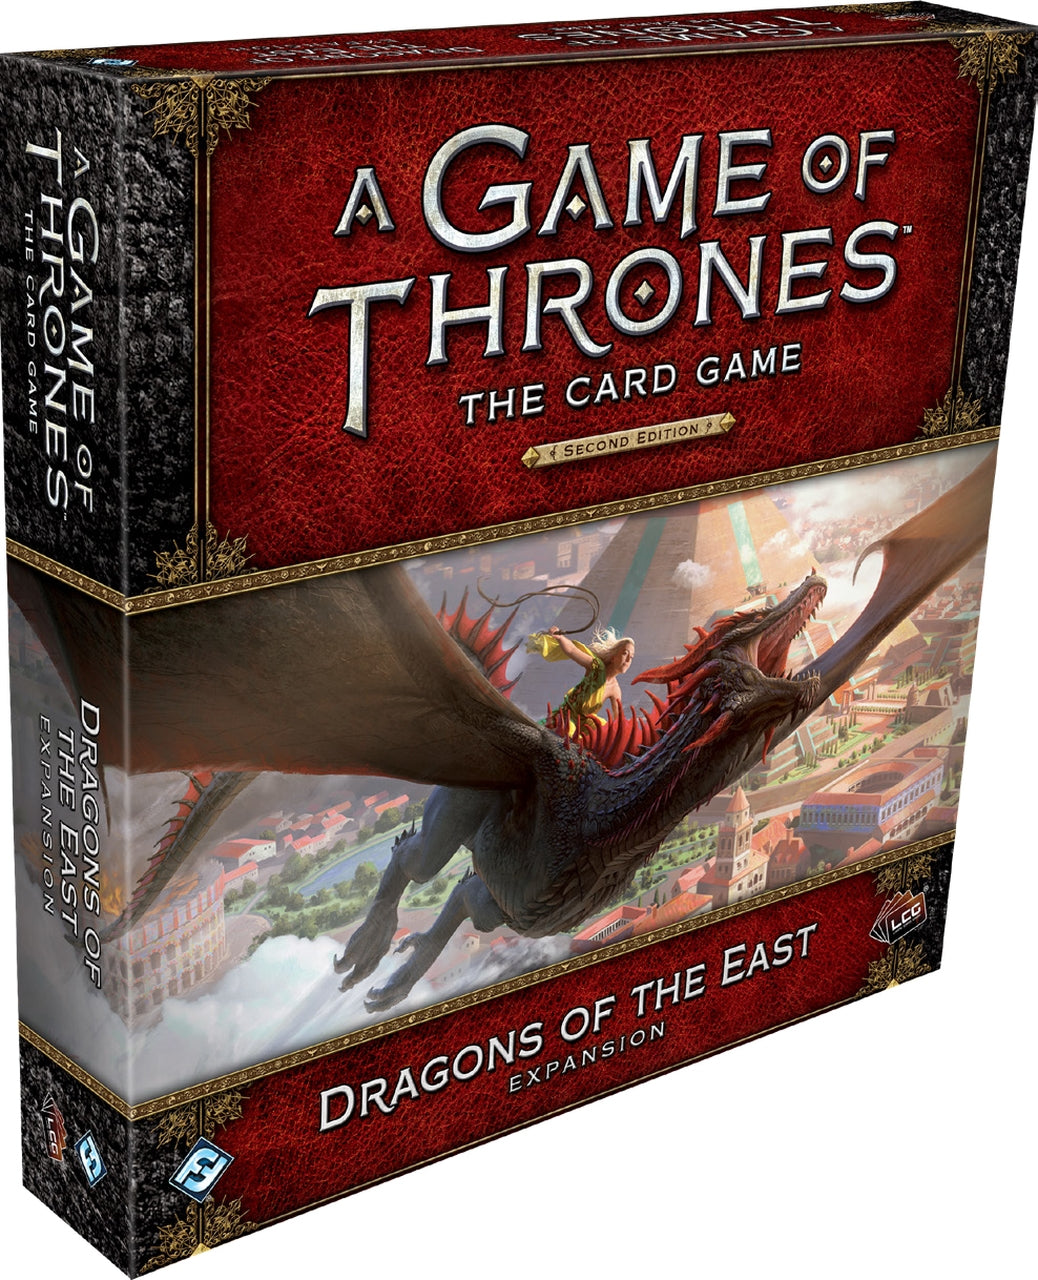 Dragon of the East - A Game of Thrones LCG Deluxe Expansion